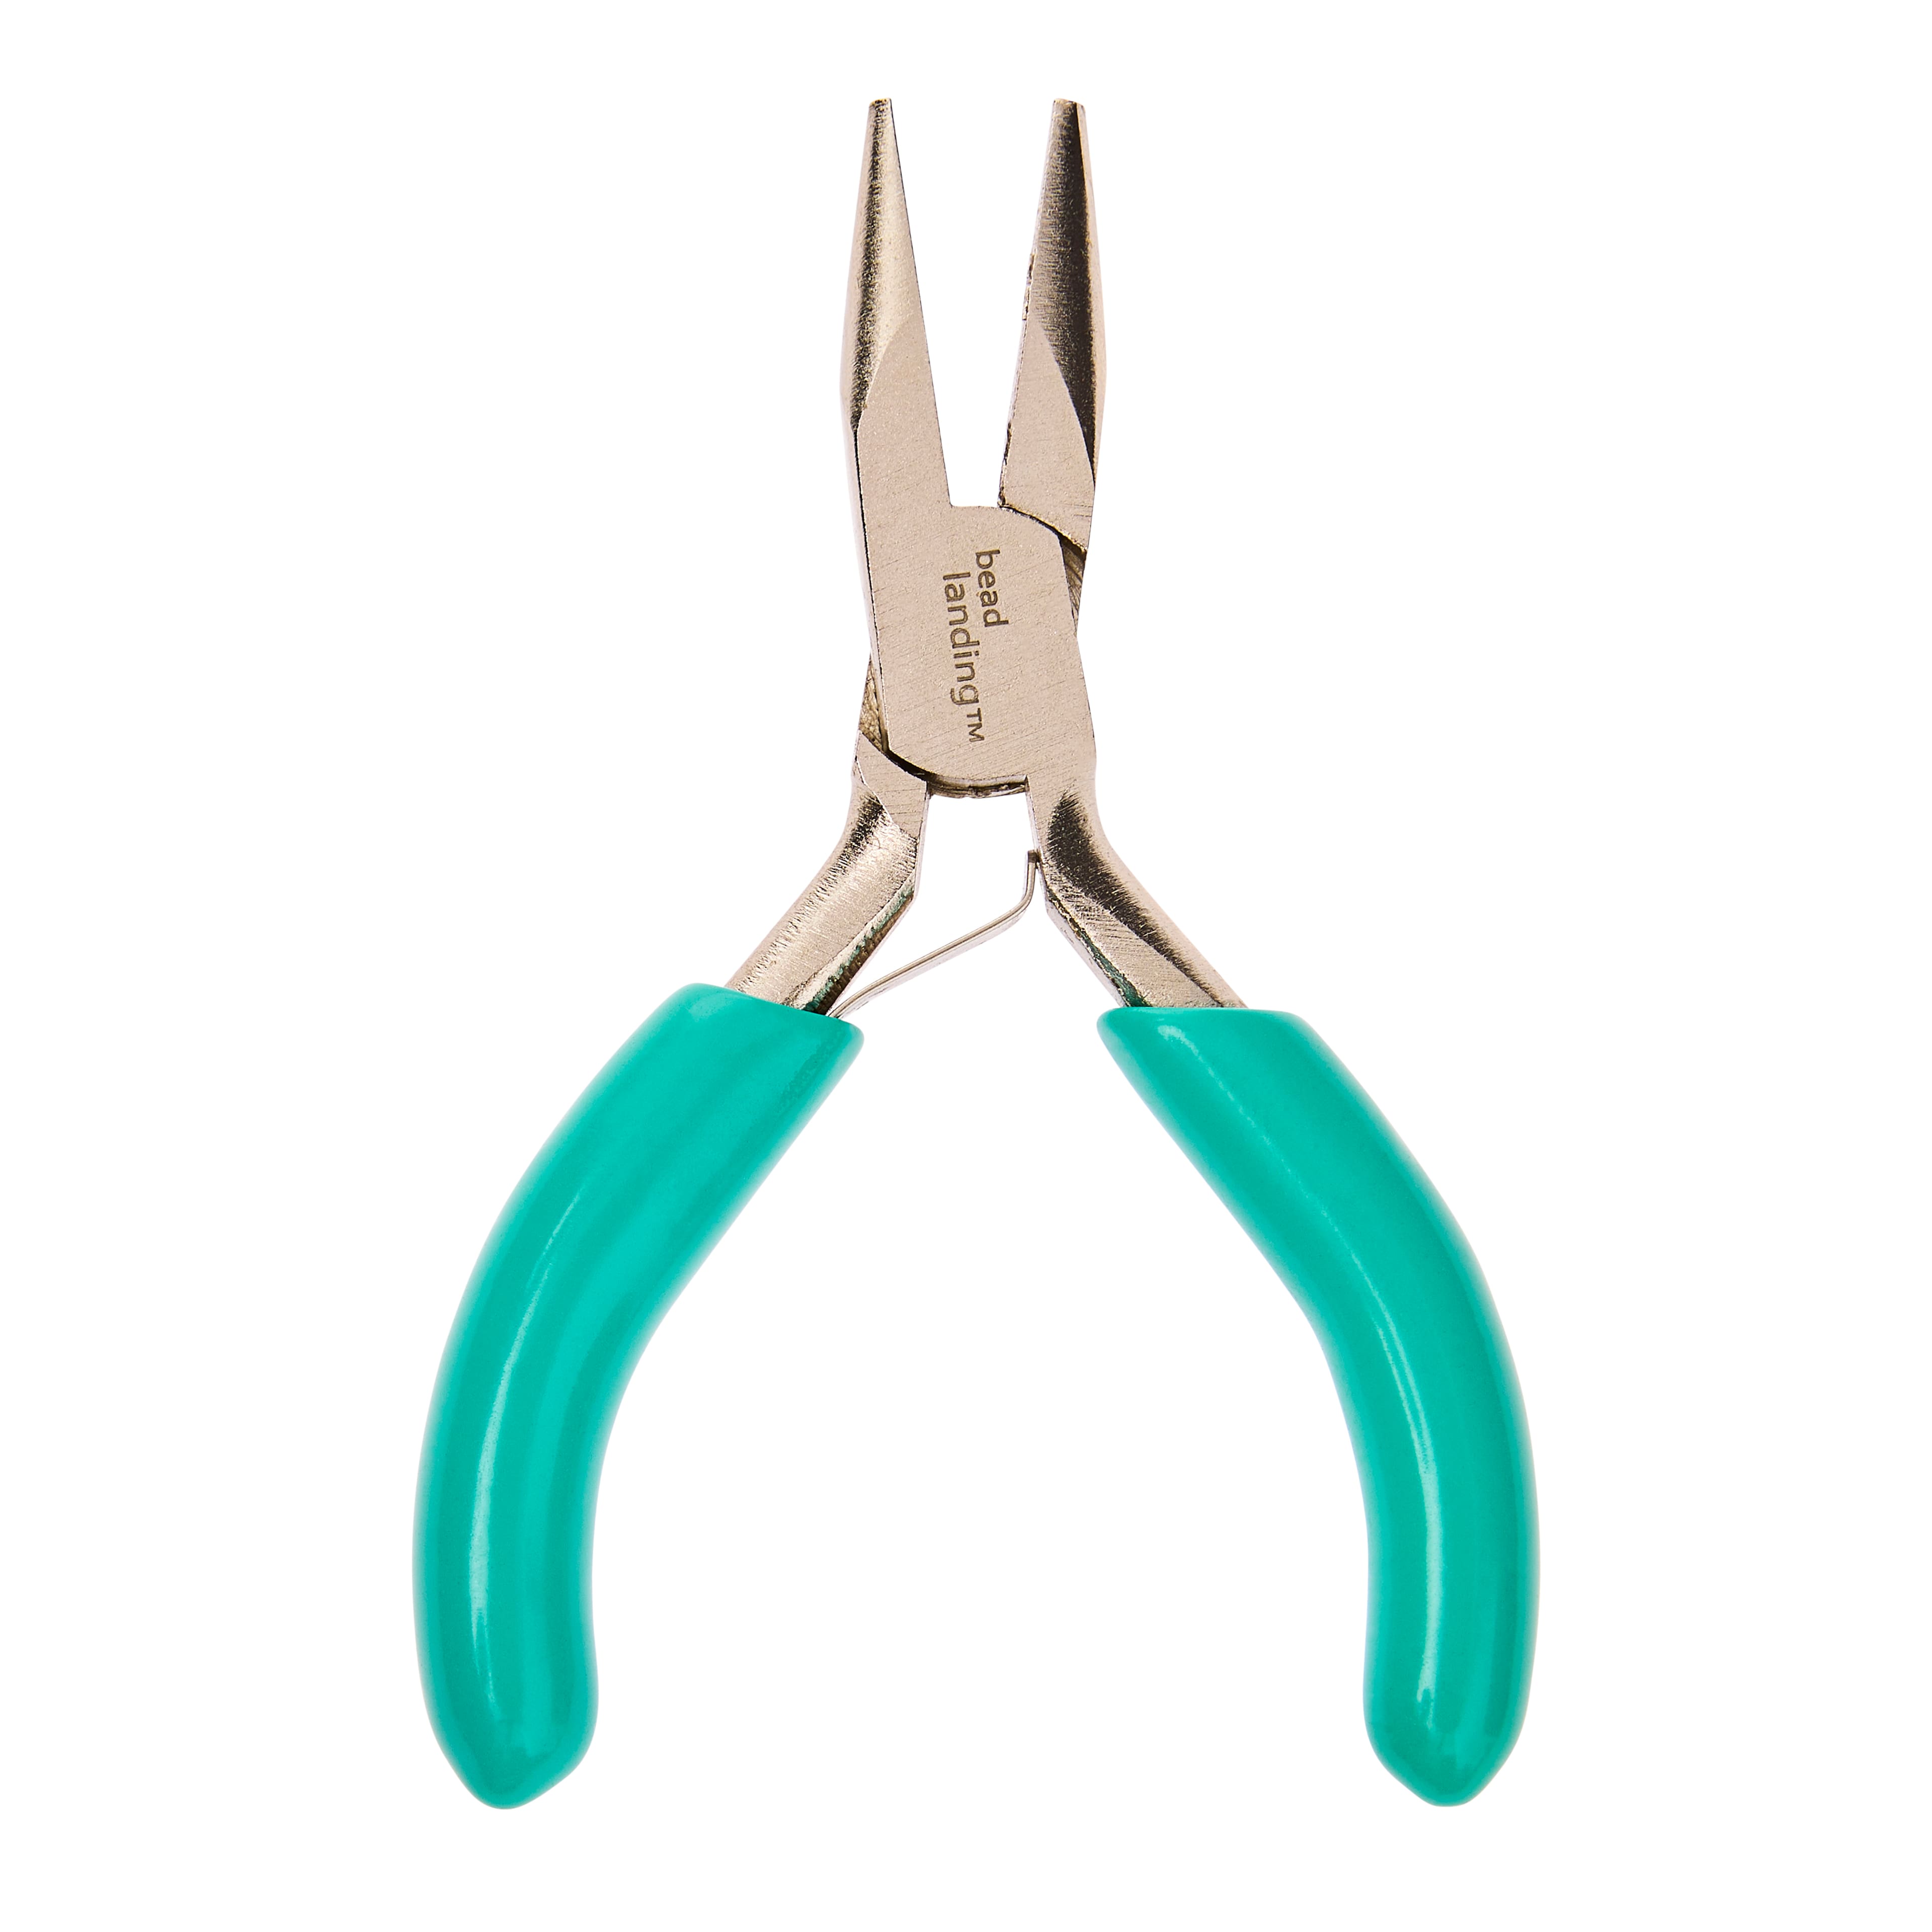 Jewelers Pliers Set Jewelry Making Beading Wire Wrapping Hobby 5 Mini  Pliers